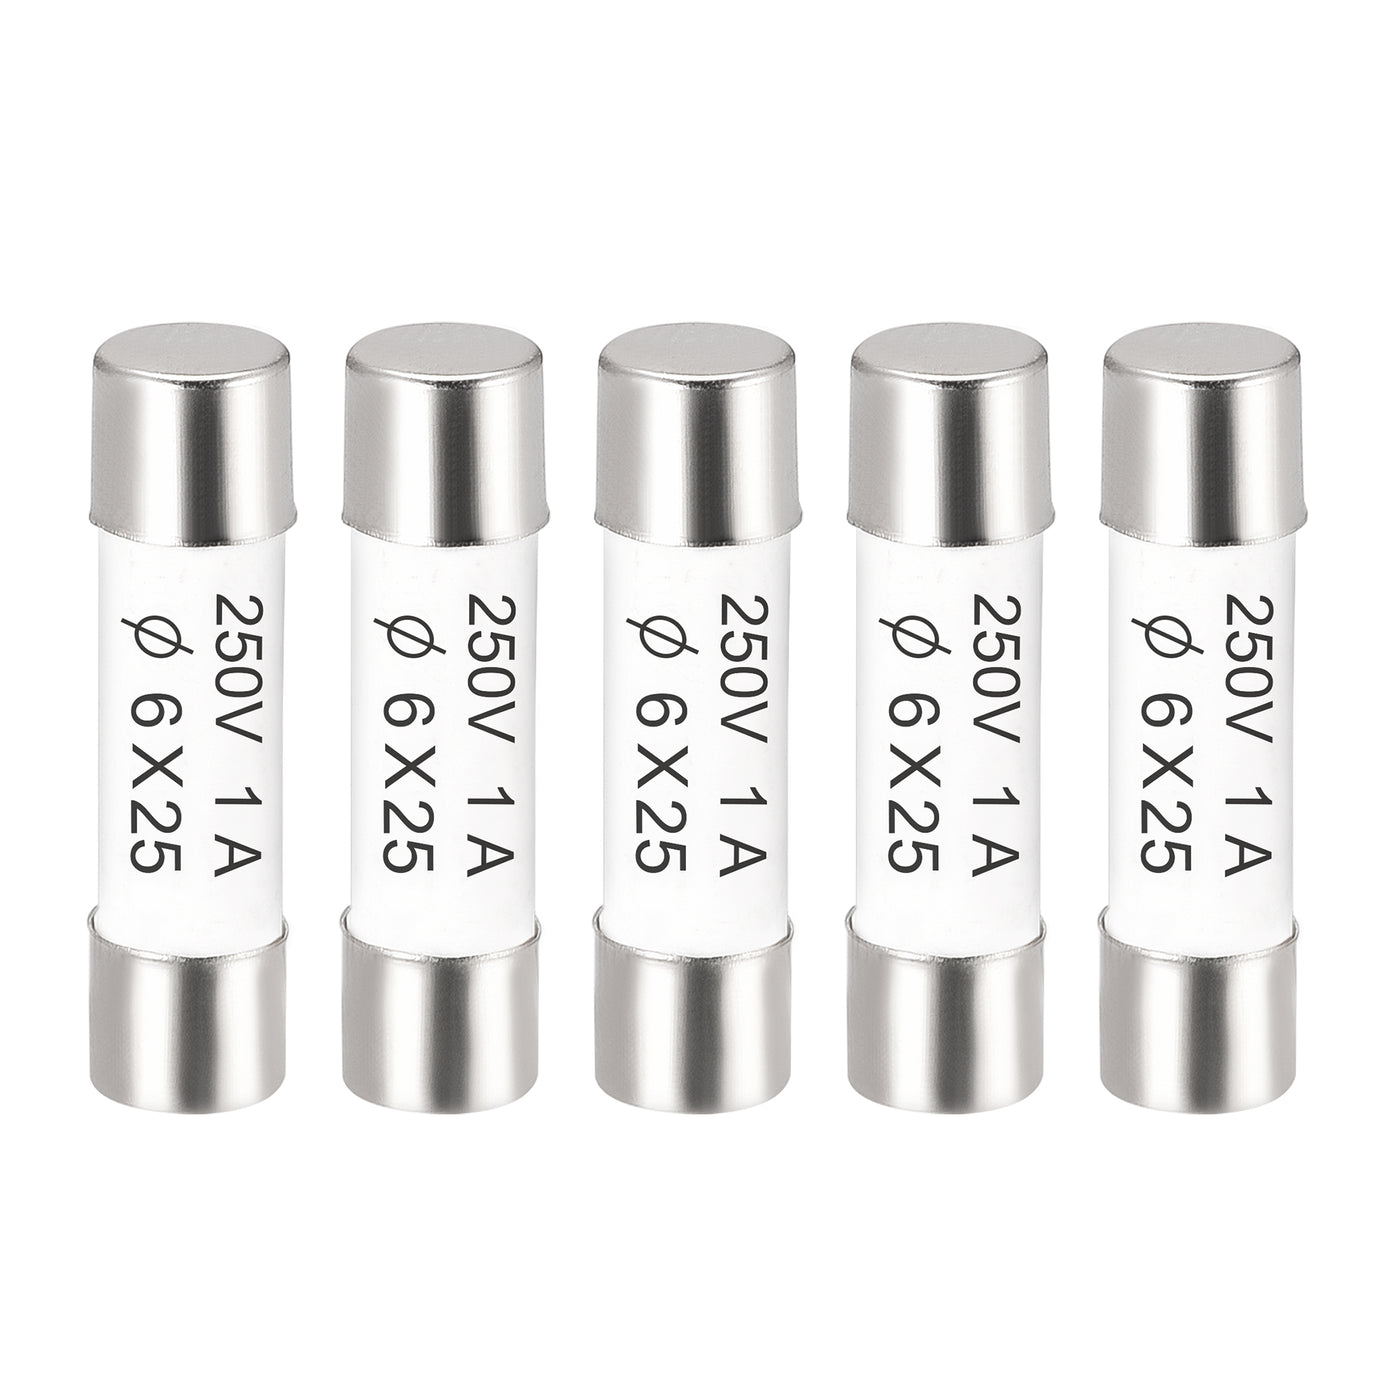 uxcell Uxcell Ceramic Cartridge Fuses 1A 250V 6x25mm Fast Blow for Energy Saving Lamp 5pcs